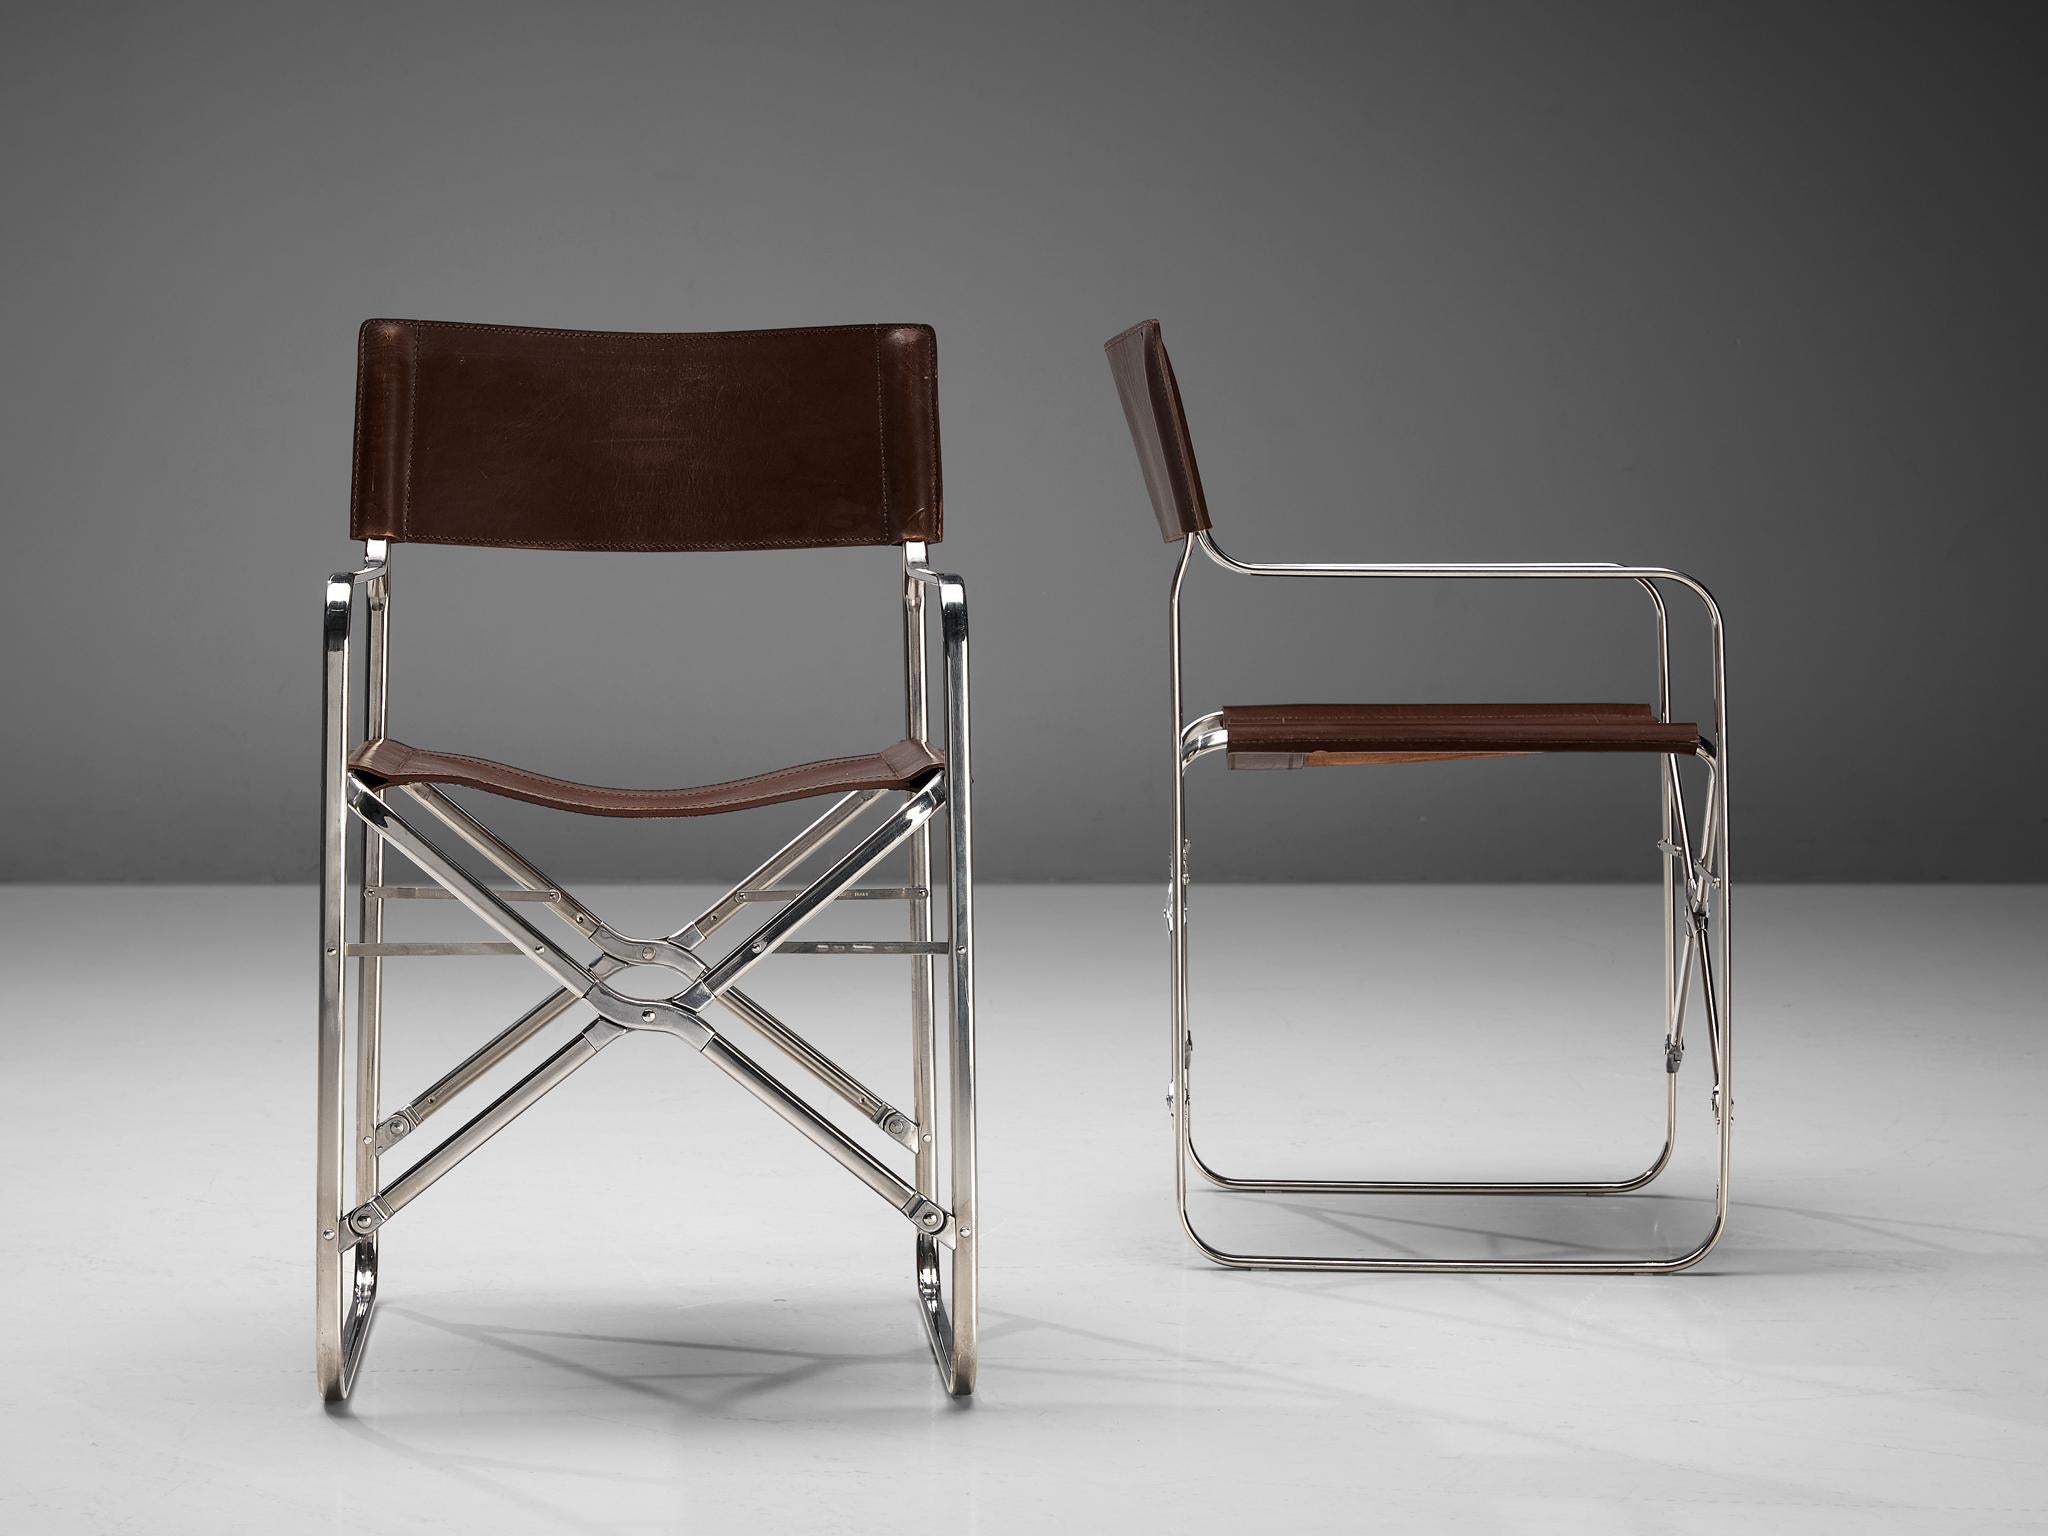 Gae Aulenti for Zanotta, folding chairs, stainless steel, aluminum, saddle leather, Italy, 1964

Gae Aulenti transformed the idea of a classic directors chair in to an innovative and multifunctional chair with this model called 'April'. These